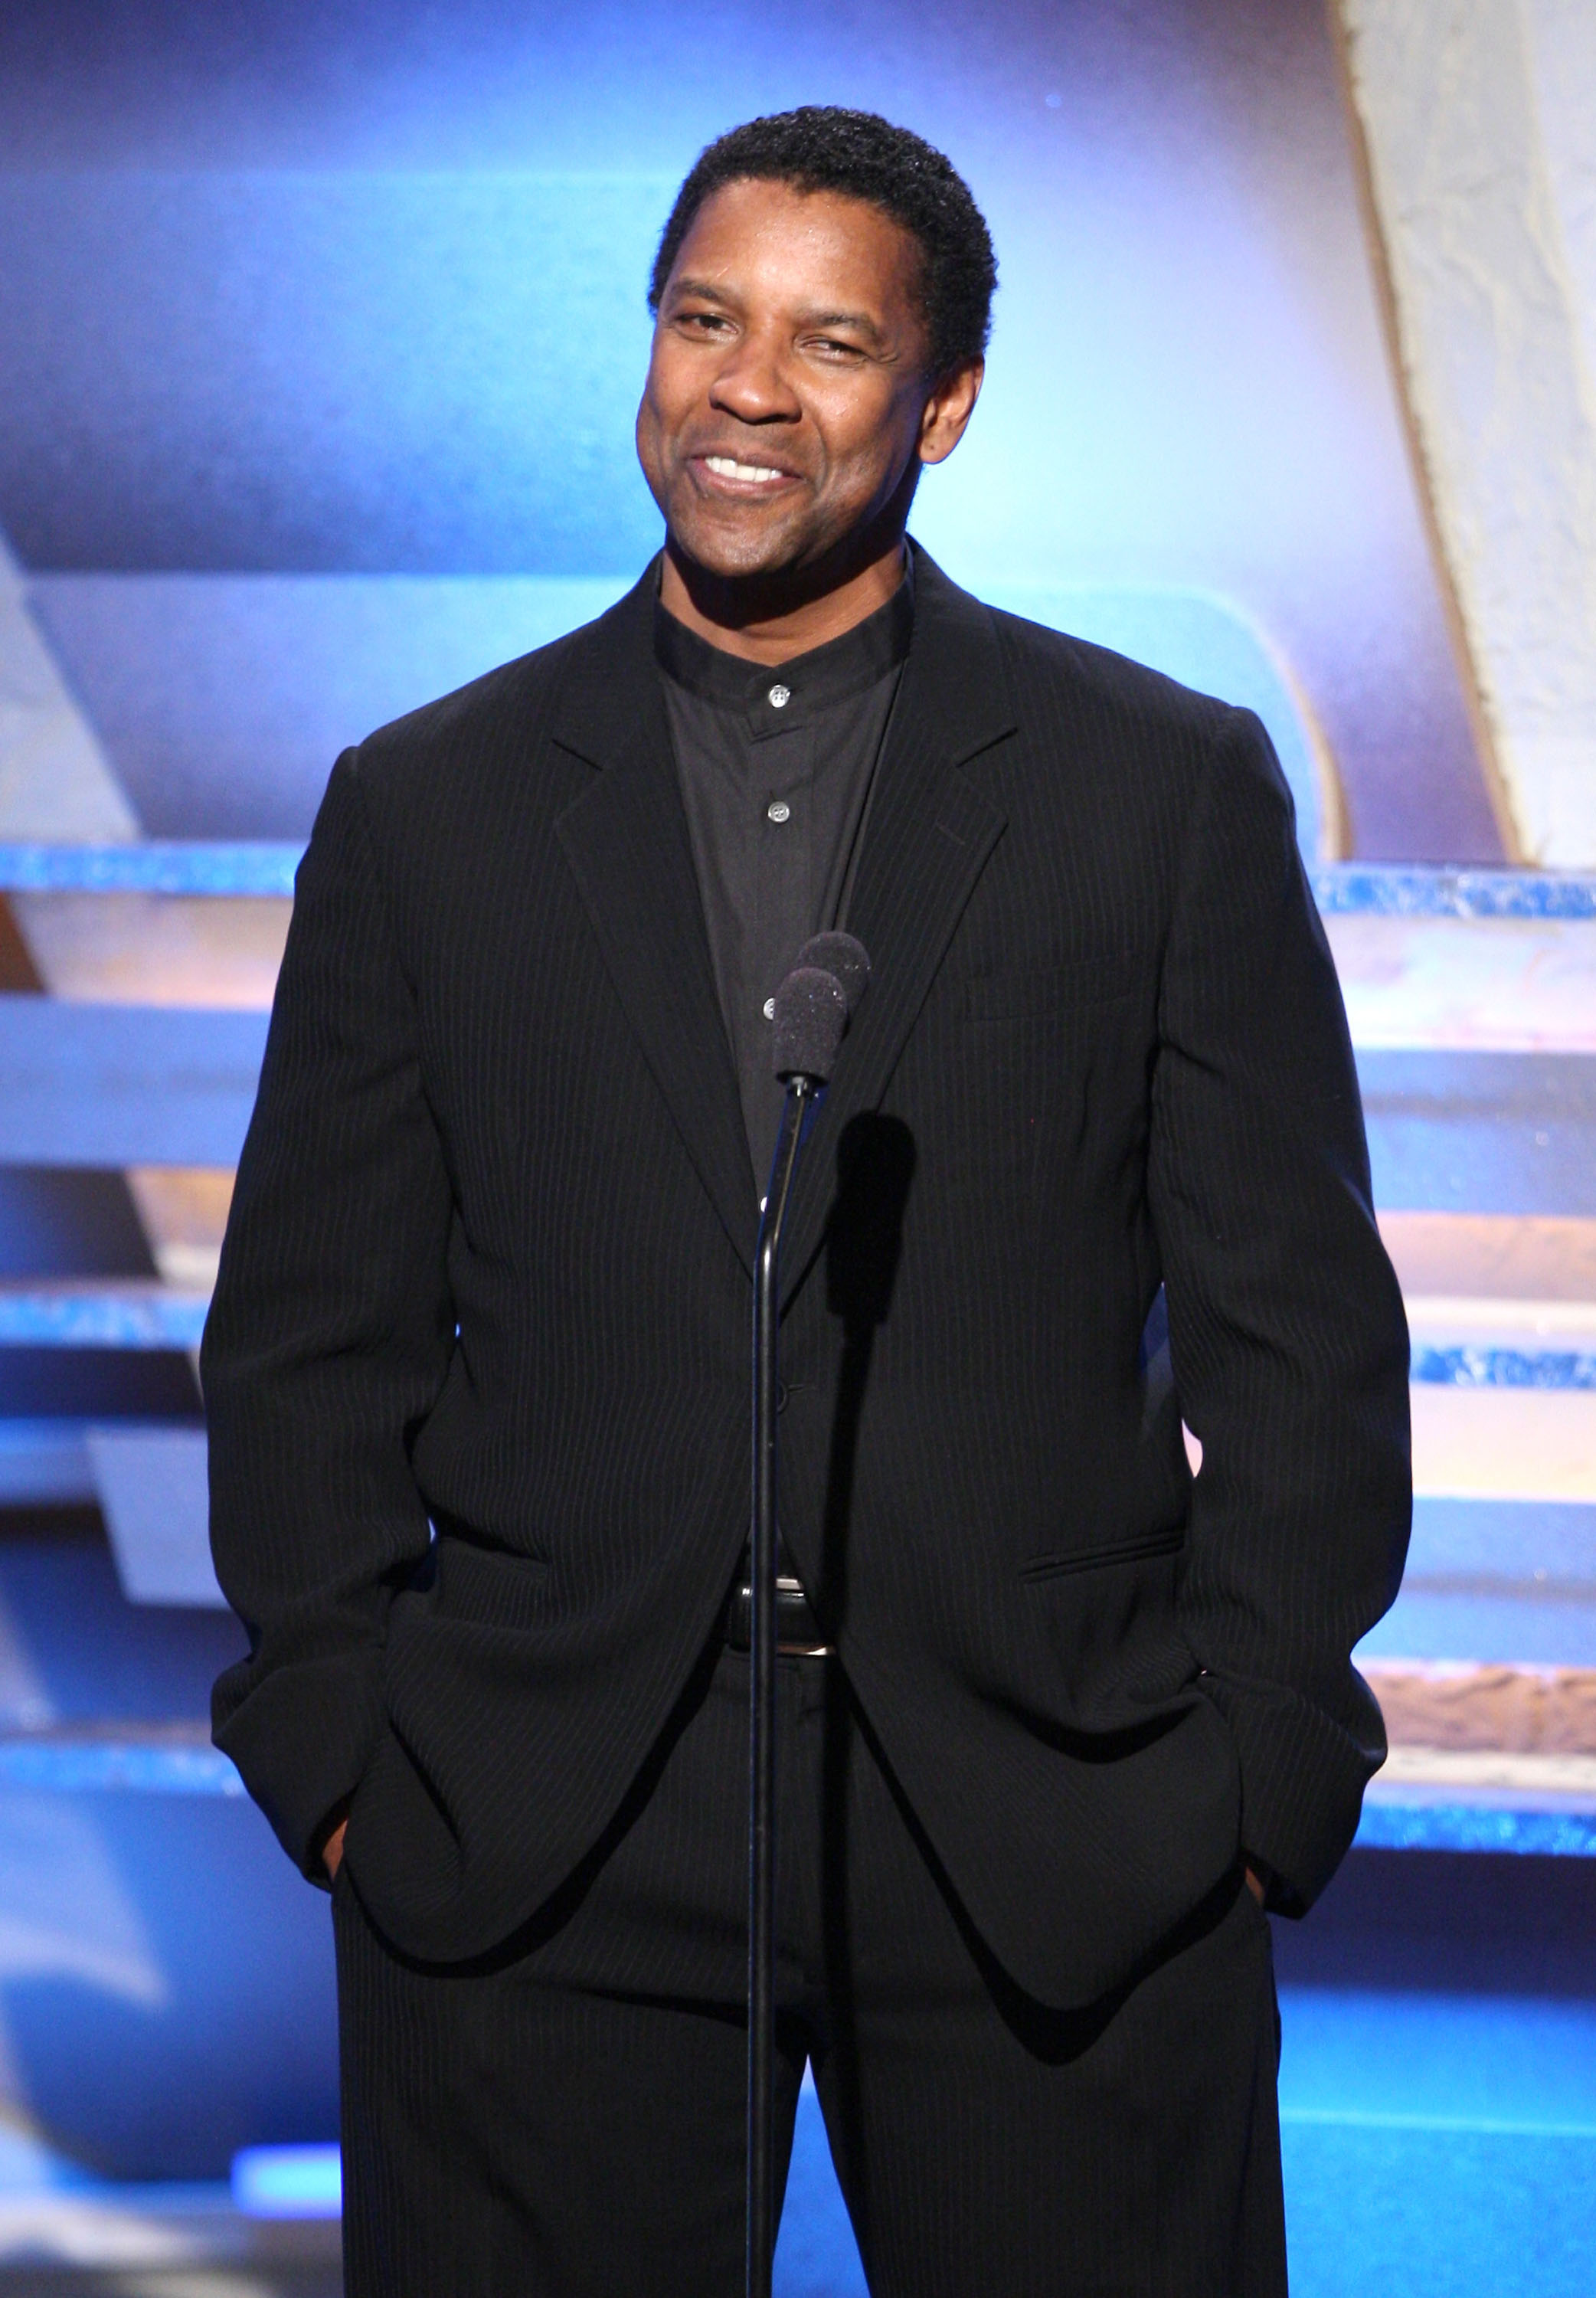 Denzel Washington in Beverly Hills, California on December 1, 2008 | Source: Getty Images